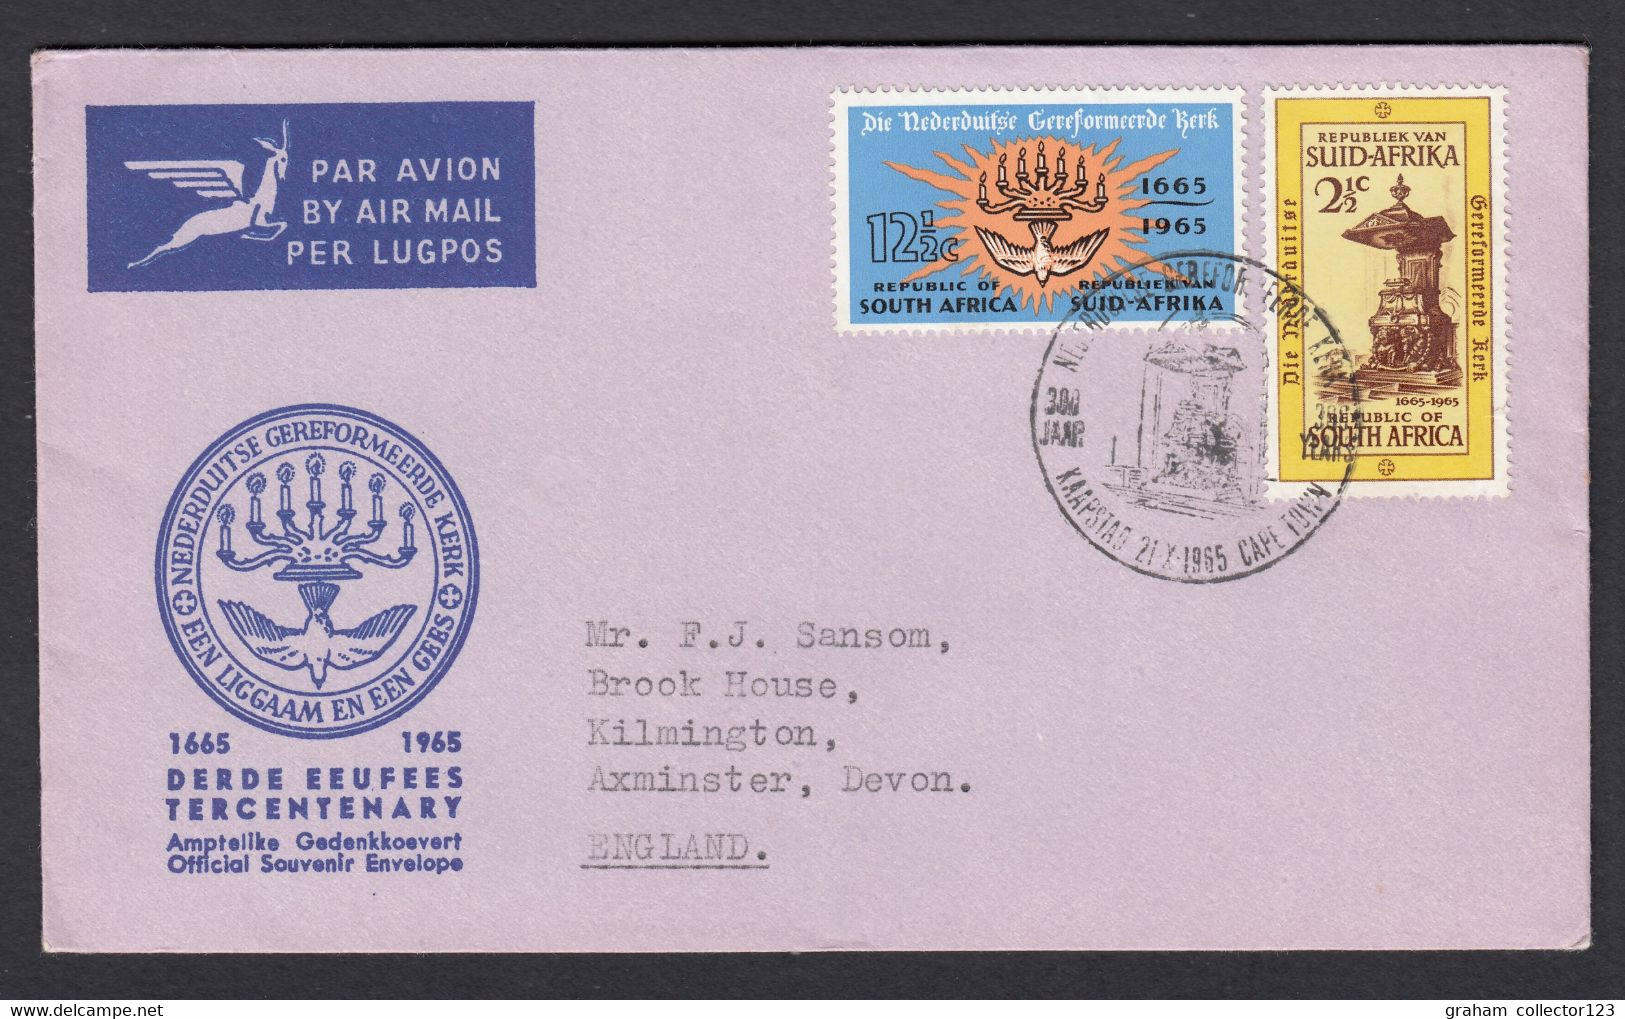 1965 Republic Of South Africa First Day Cover Derde Eeufees Tercentenary 1665-1965 Cape Town Cancel - Covers & Documents